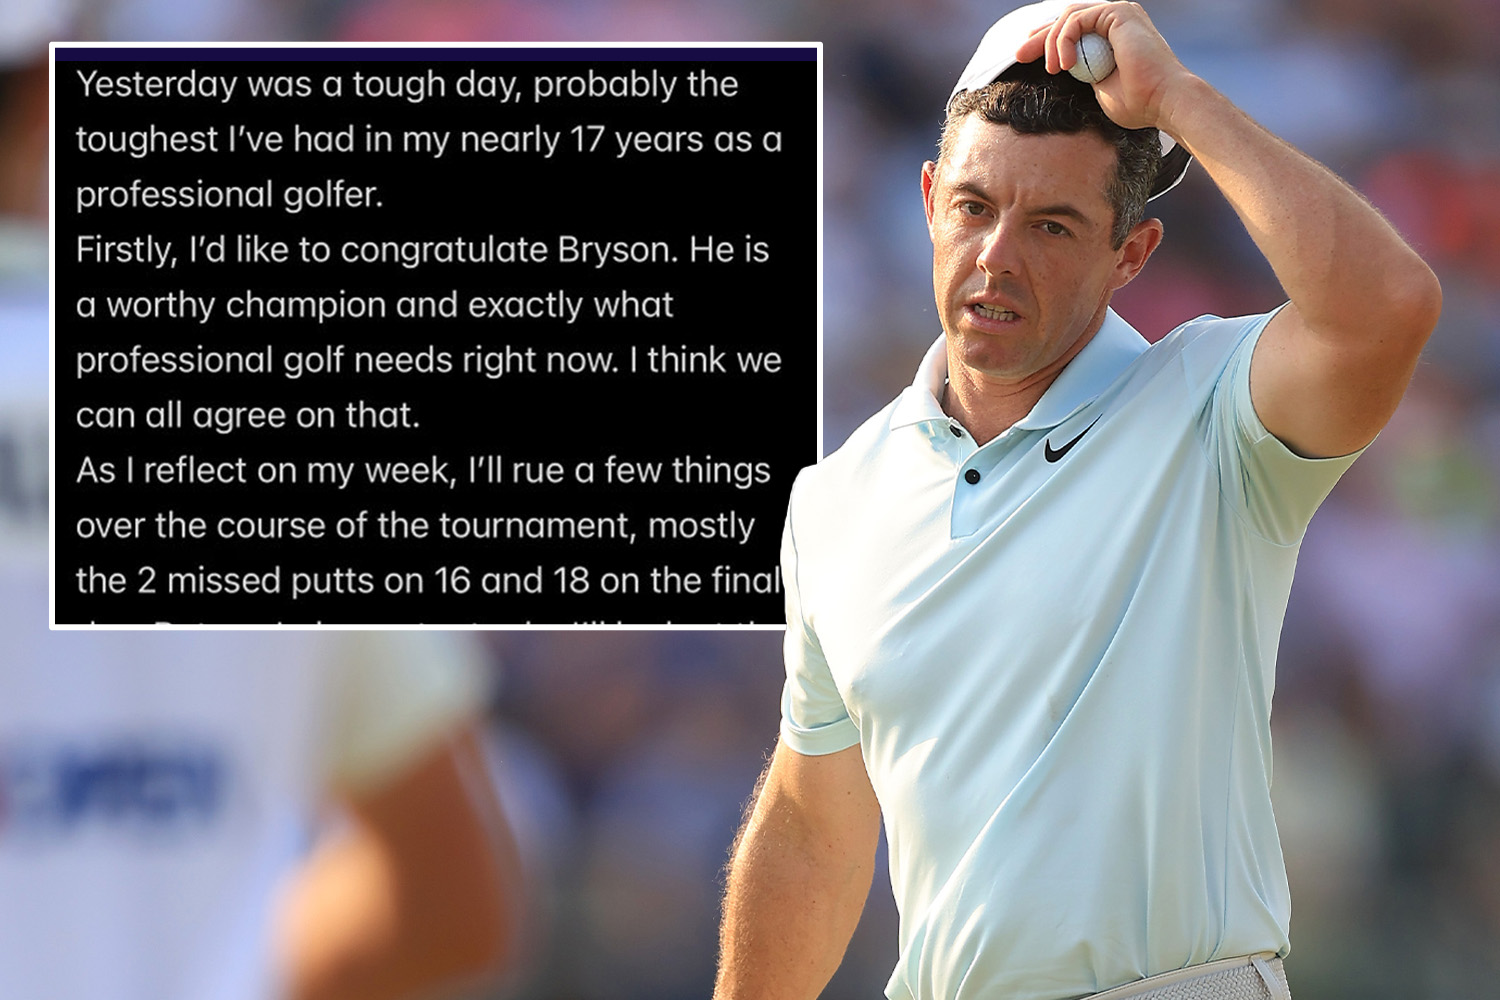 Rory McIlroy breaks silence on ‘toughest day in 17 years’ after US Open setback